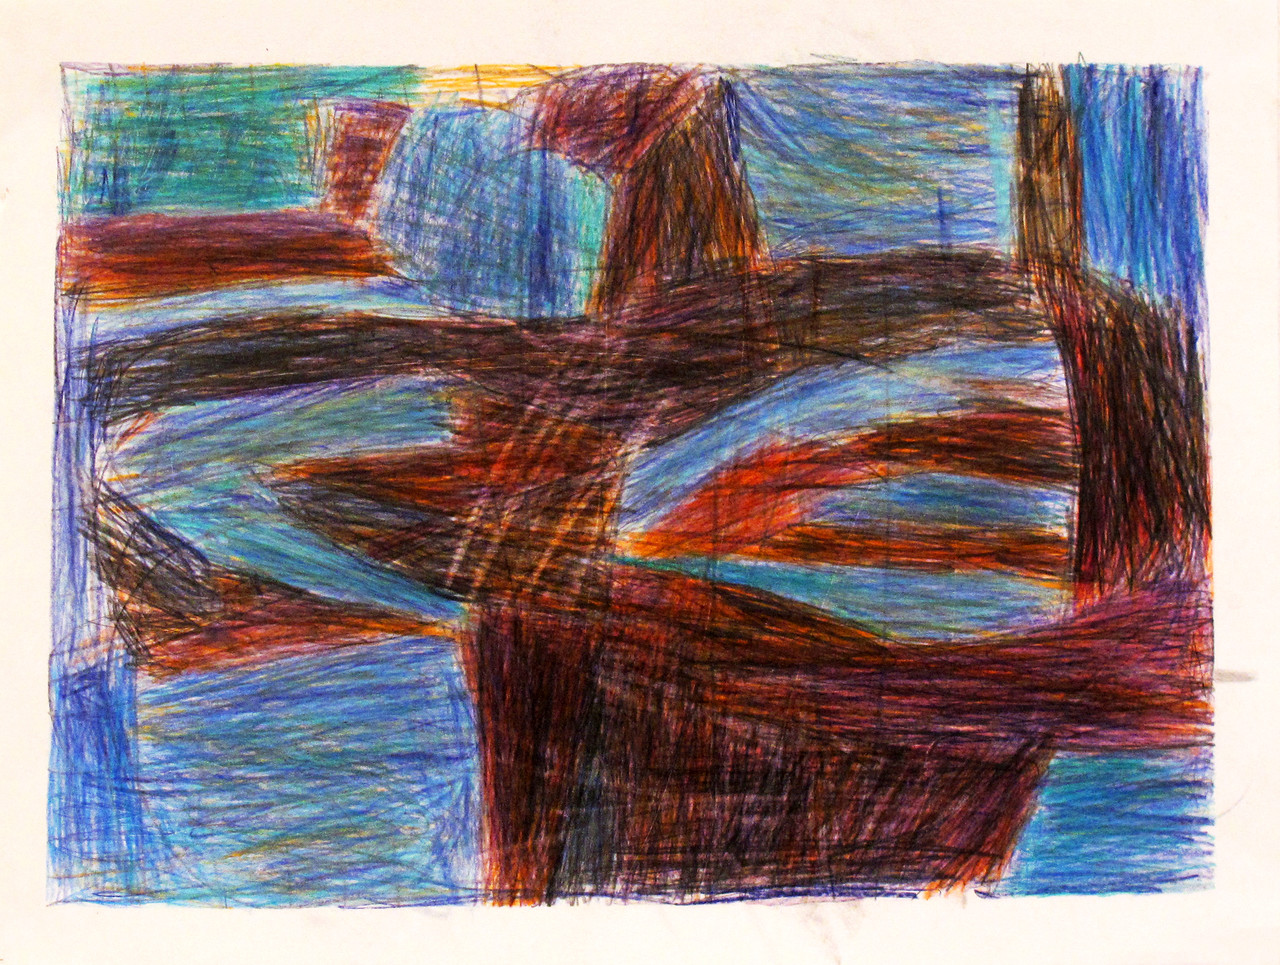 Untitled, 1988, Colored pencil and graphite on paper, 38.7 x 47 cm, BS 008